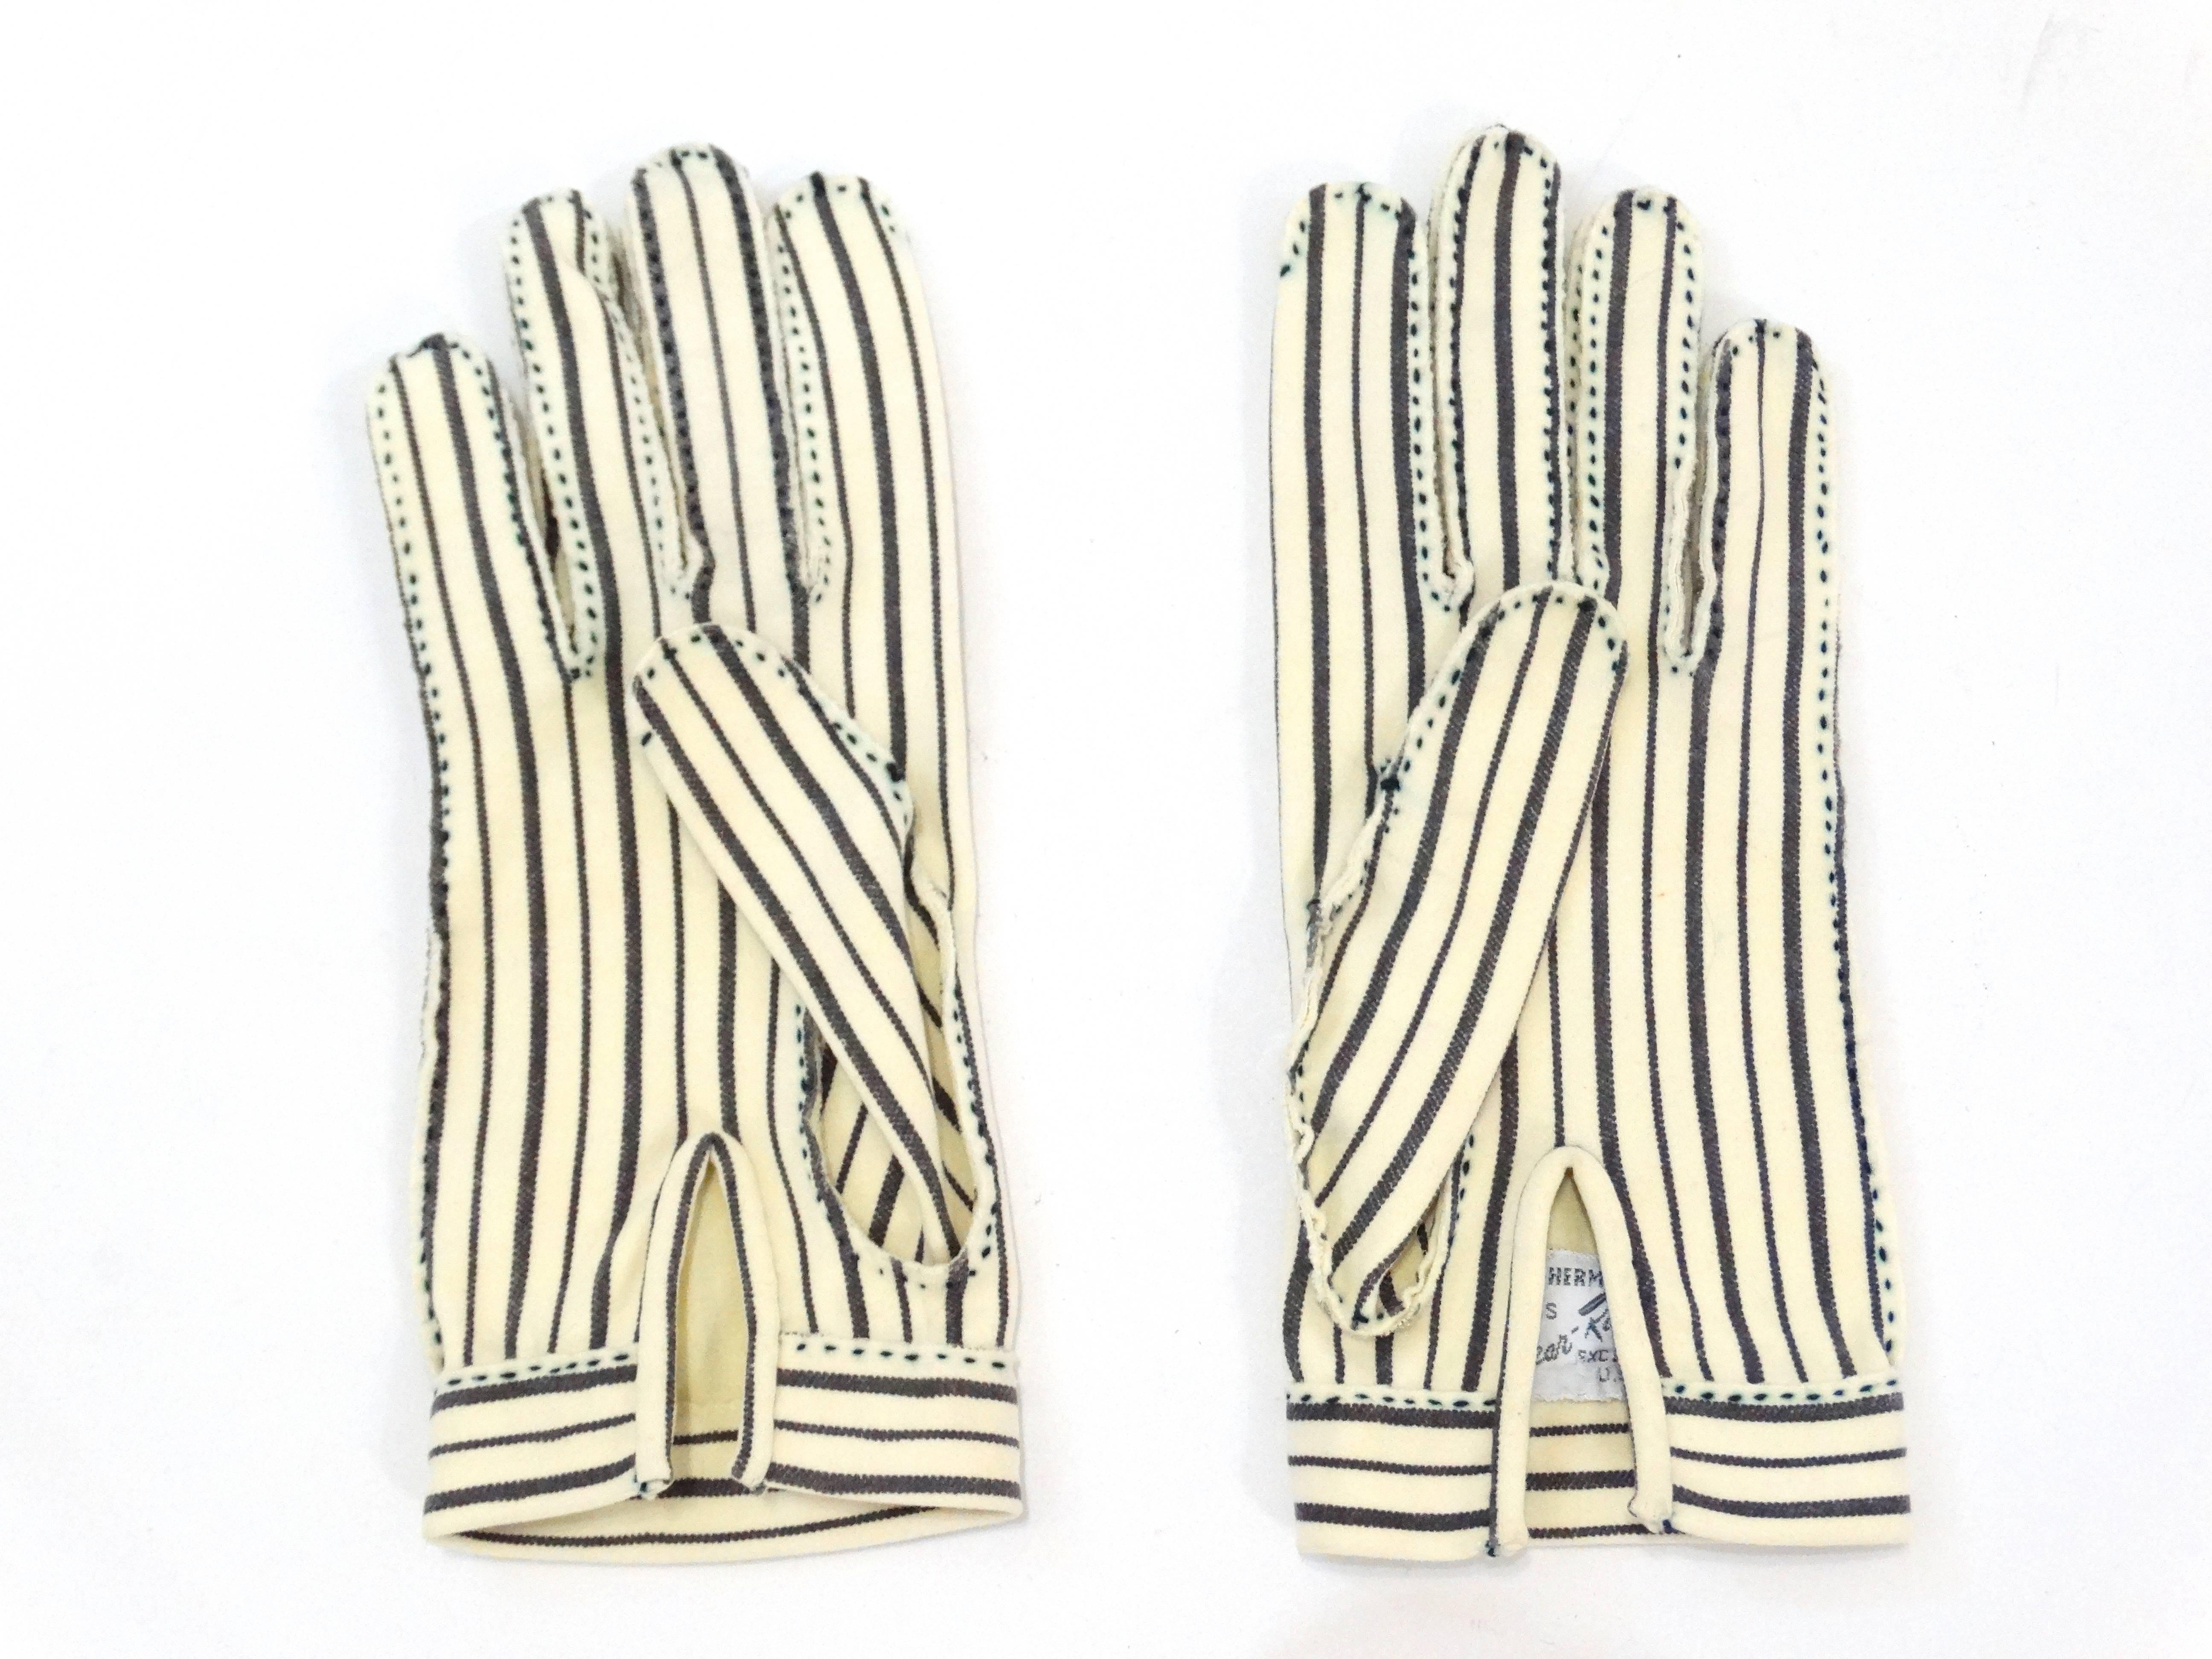 Is there anything more glamorous than a pair of driving gloves? Yes- HERMES driving gloves. Creamy white and black vertical stripes with matching heavy stitched details. Split at the wrist for easy on and off. These gloves are petite and would best